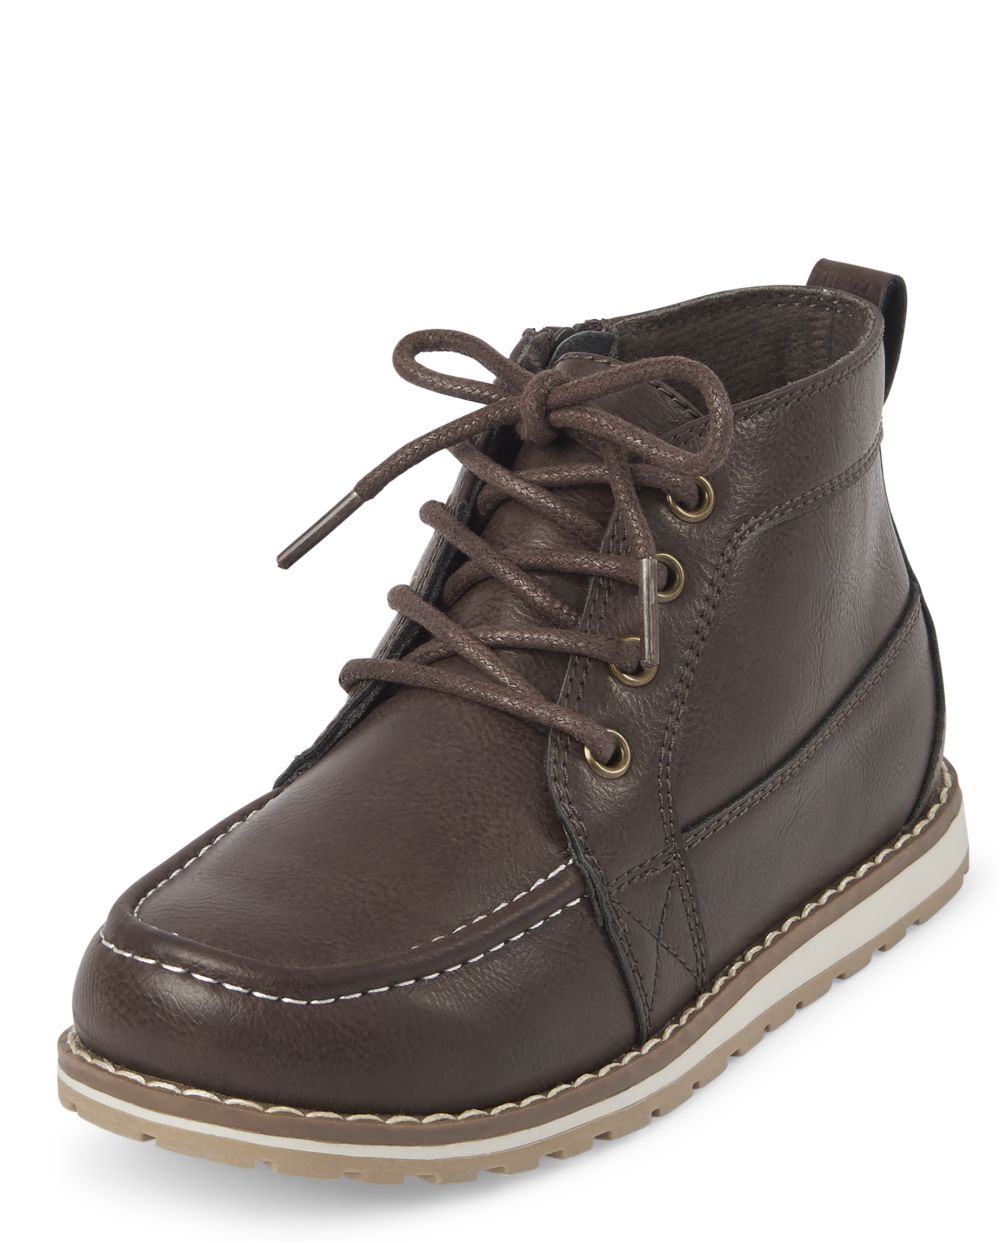 

s Boys Lace Up Mid Top Boots - Brown - The Children's Place